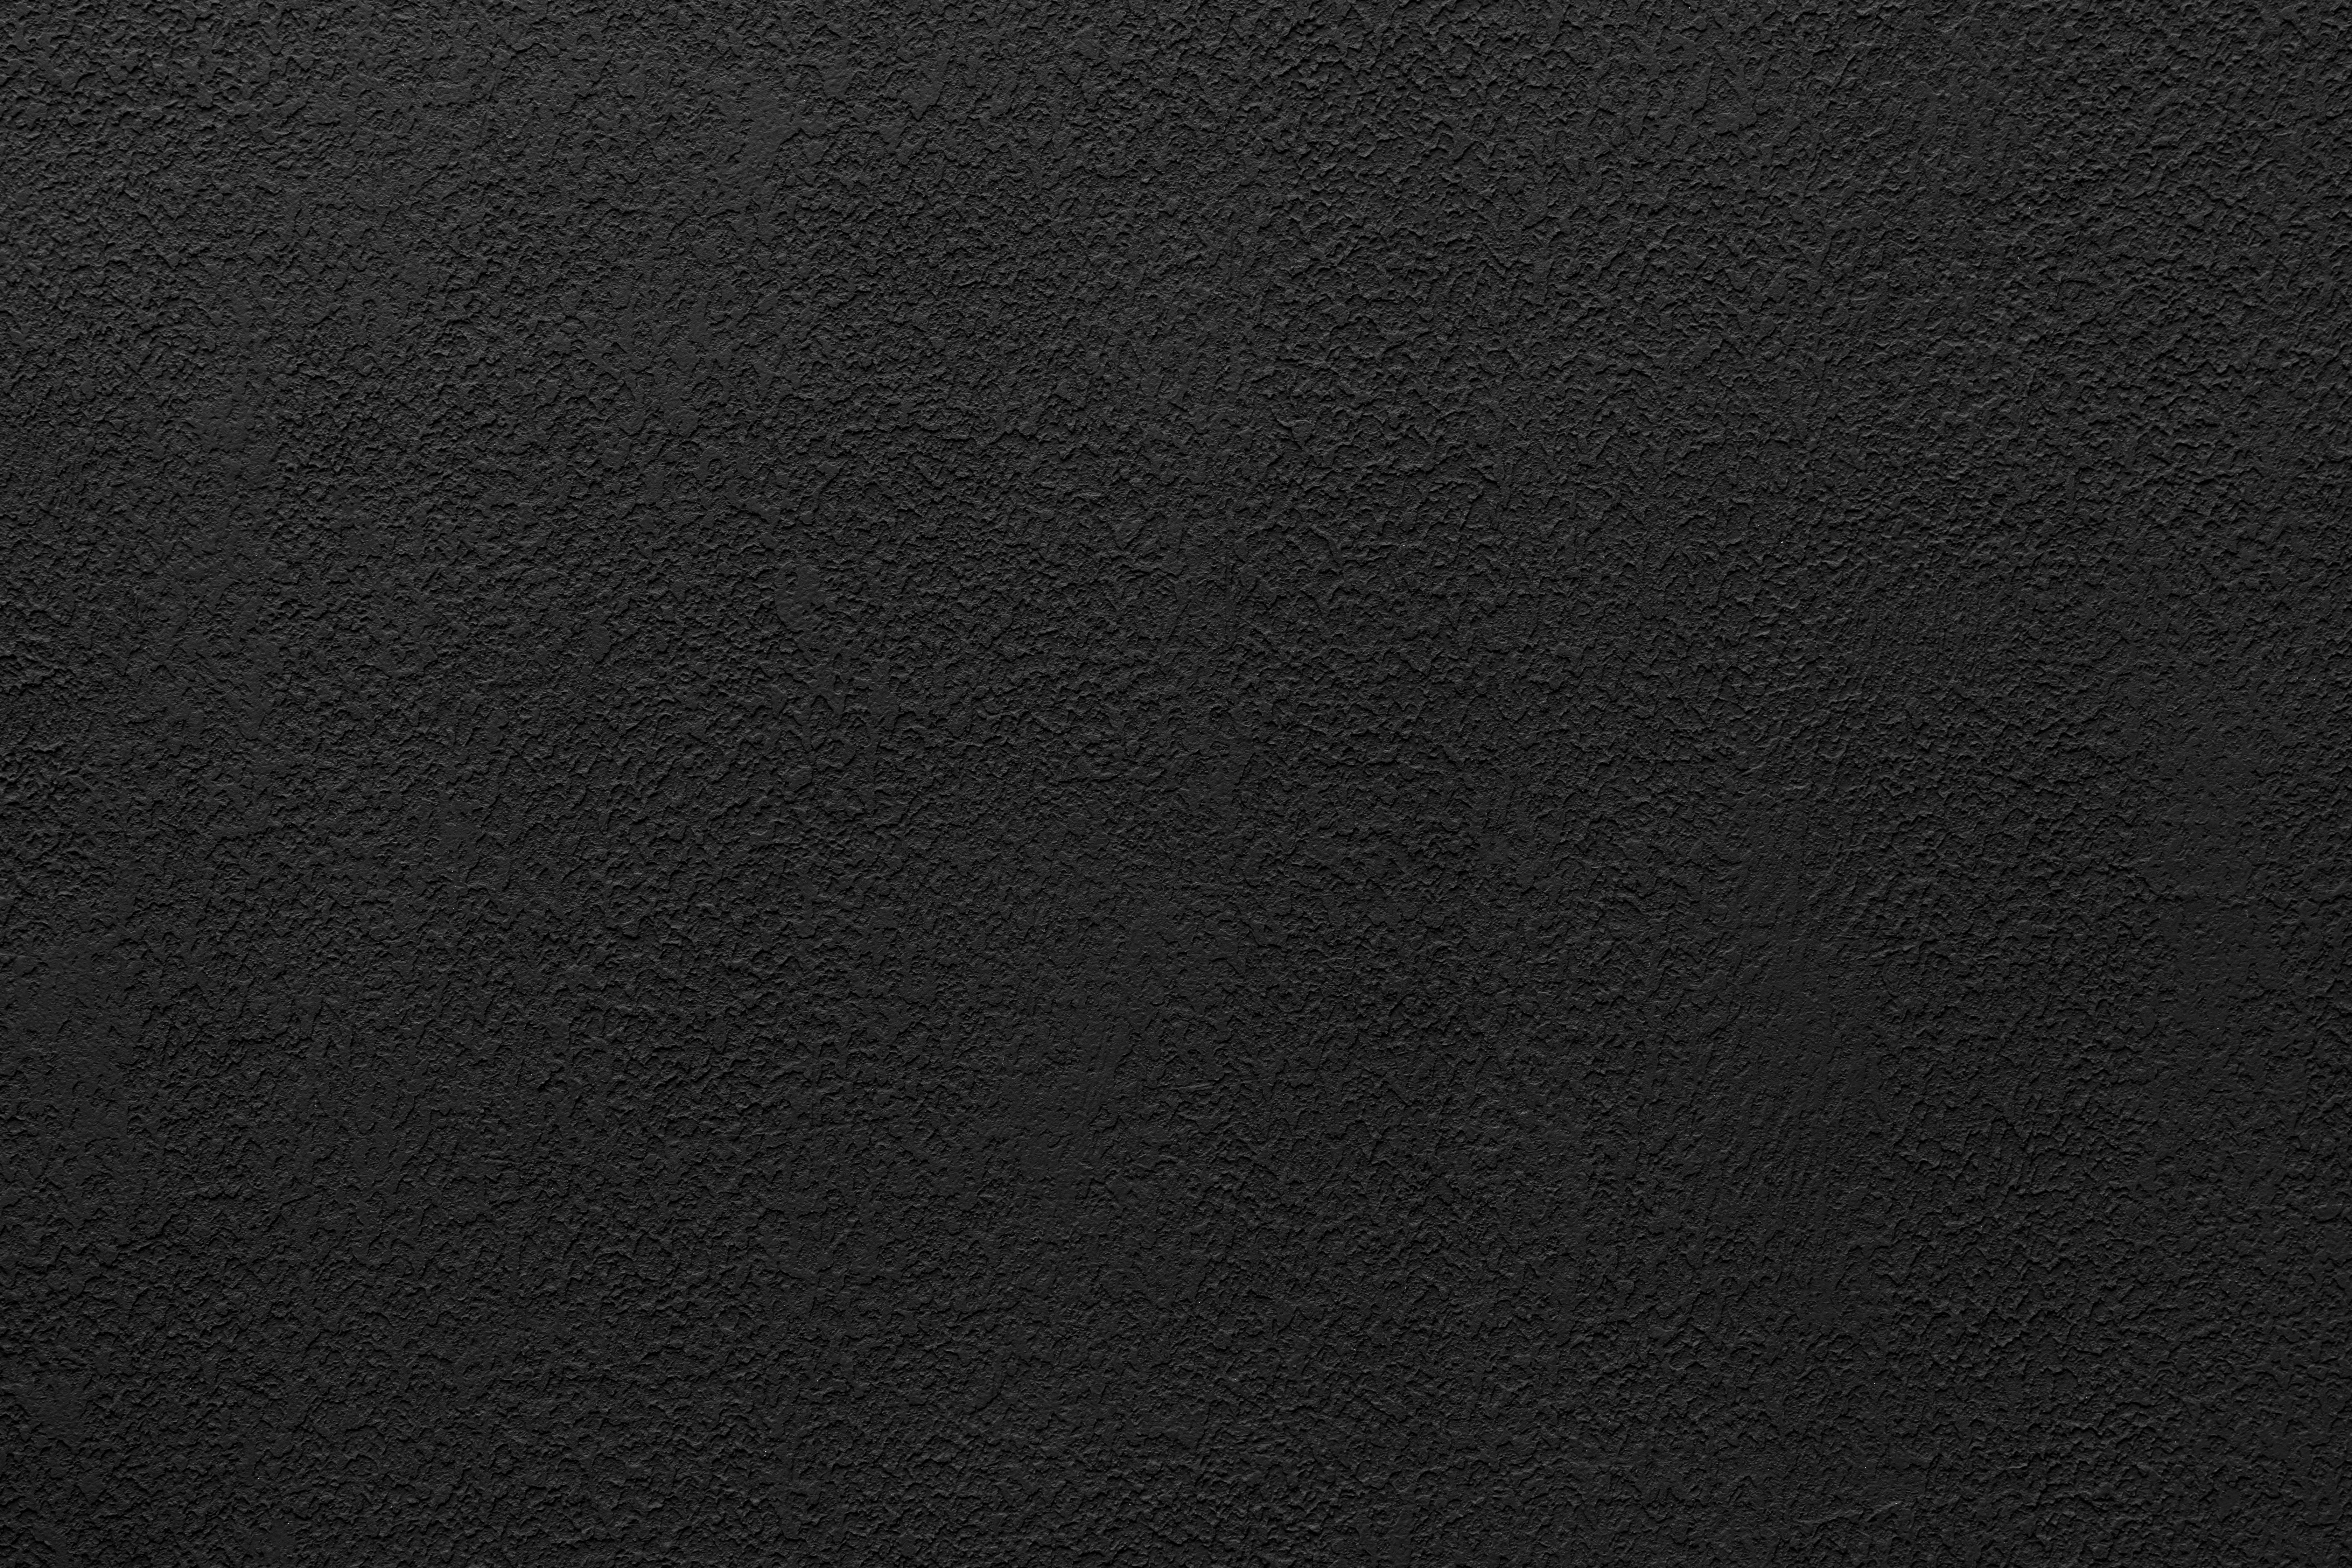 Dark grey black background and texture, Dark cement wall background, Black painted concrete wall.